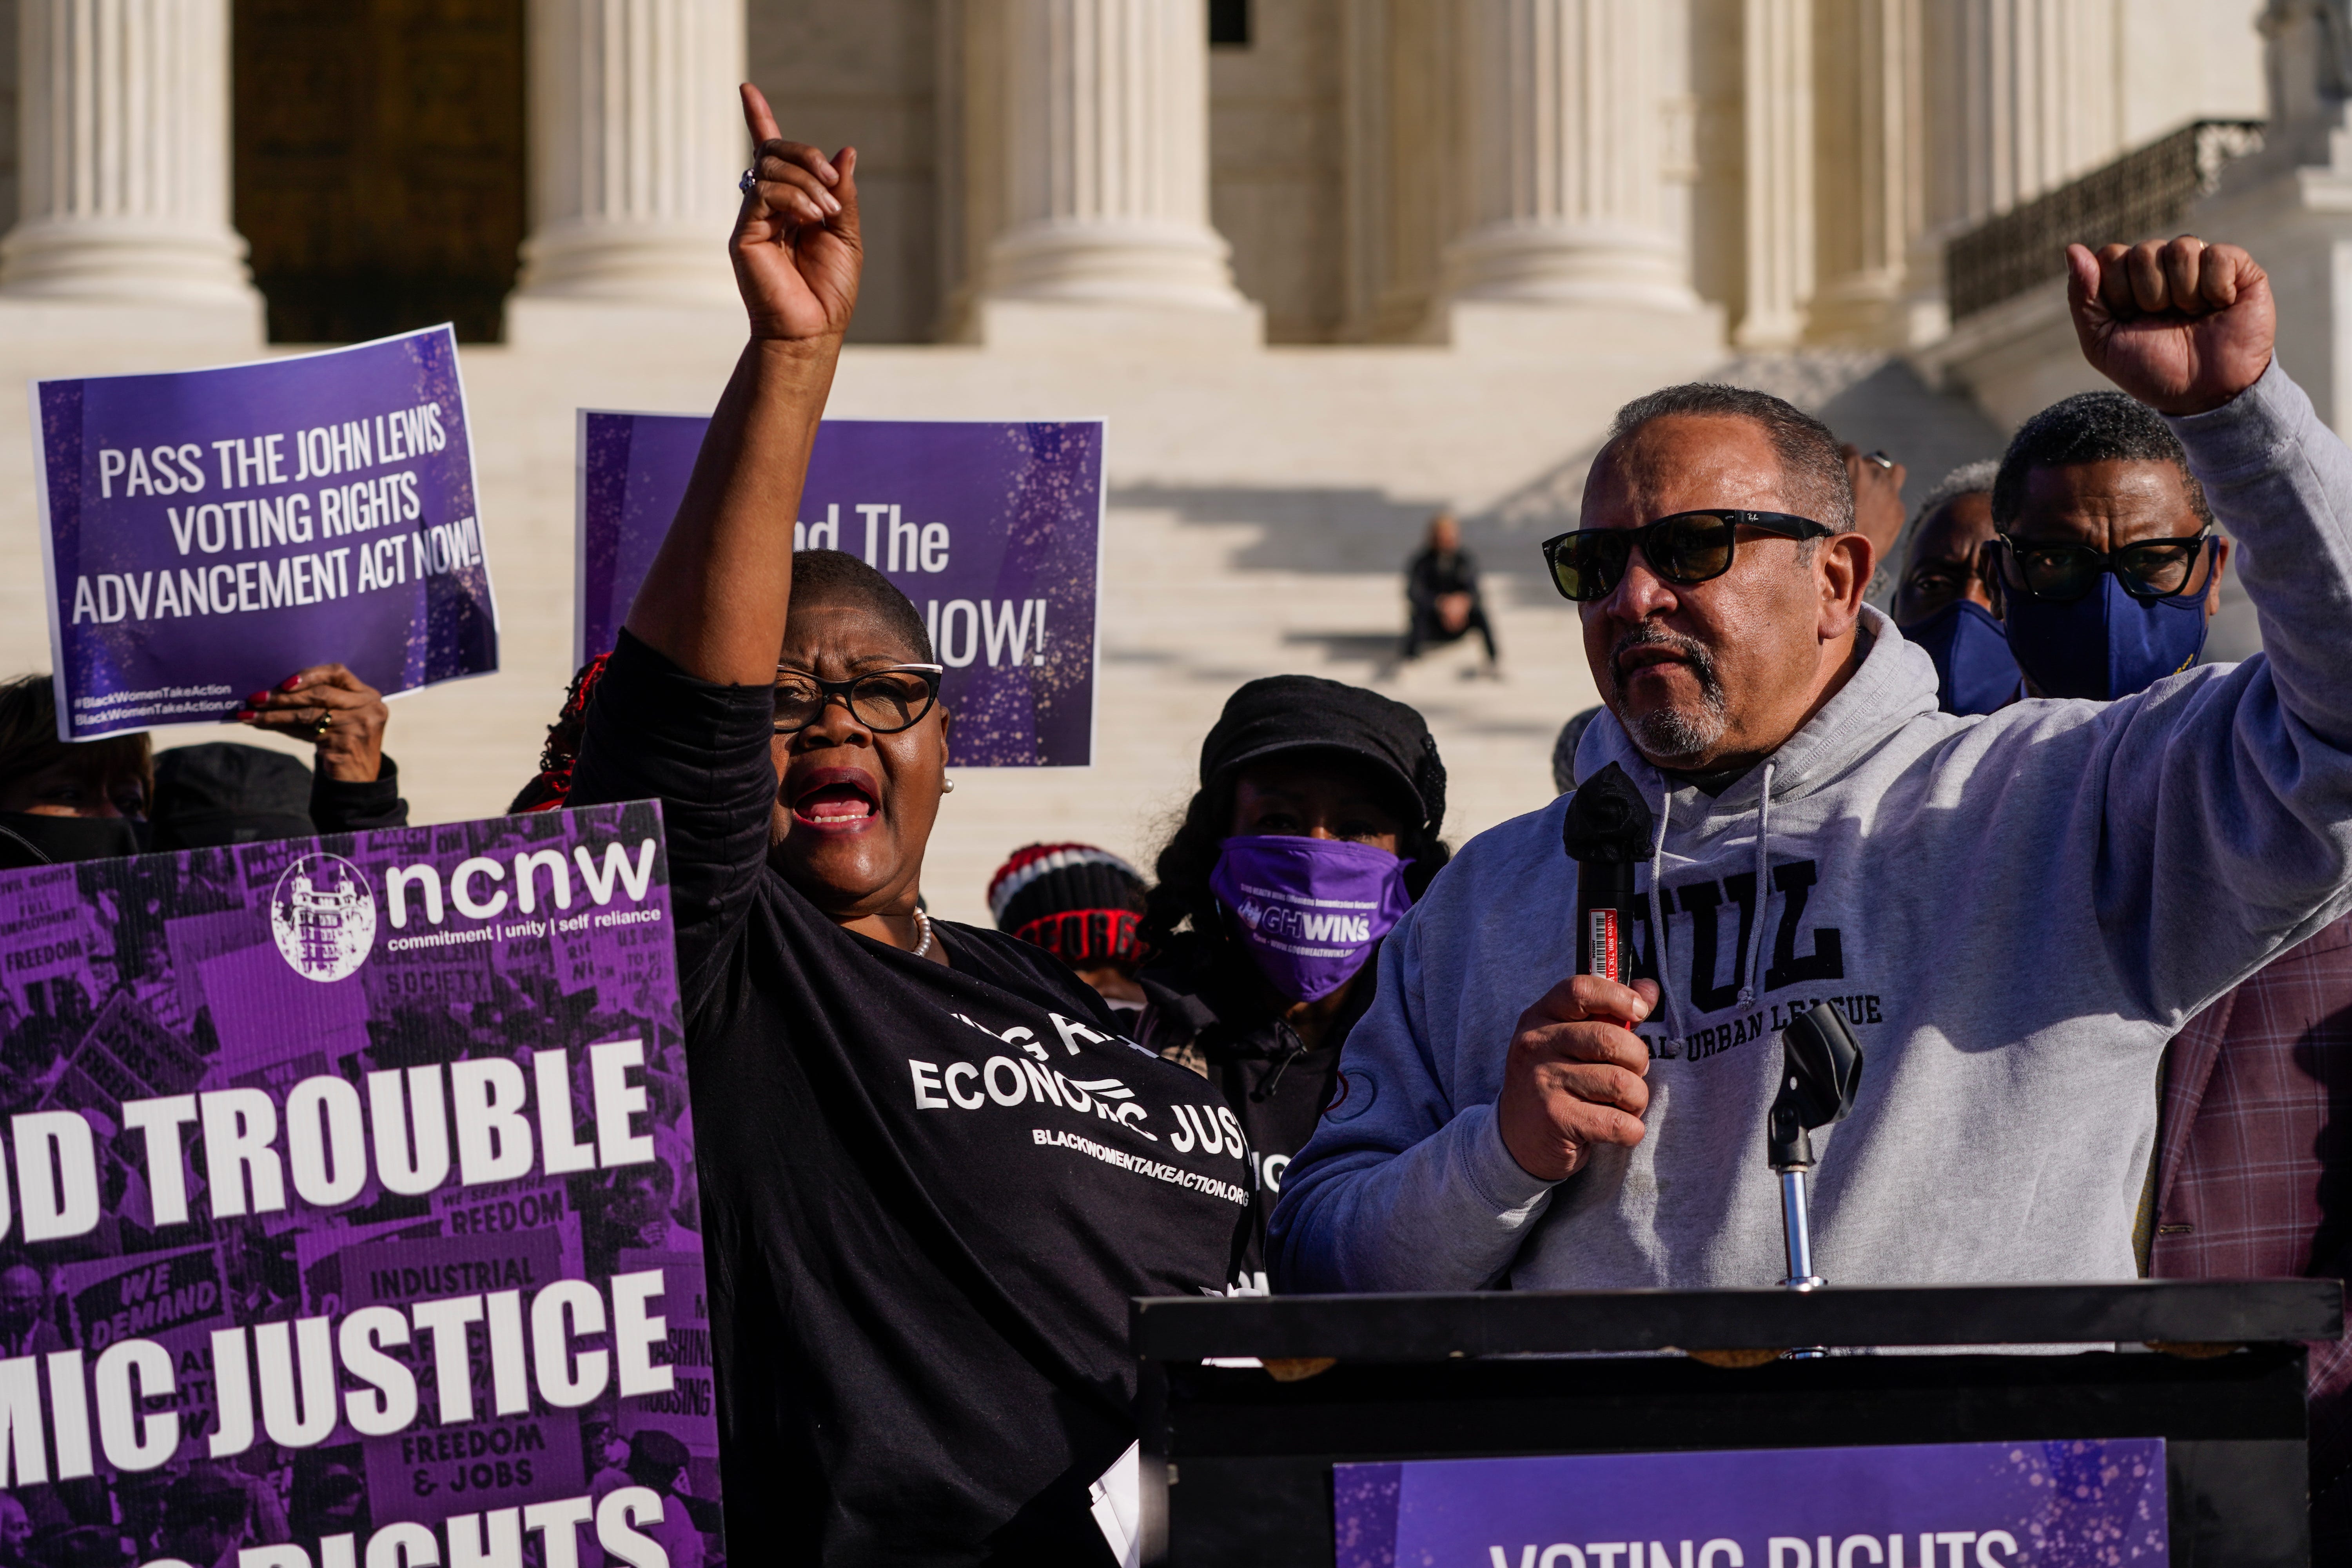 Marc Morial, president and CEO of the National Urban League, addressed the crowd outside the U.S. Supreme Court on Nov. 16, 2021, during the "The Freedom Walk" rally in support of the John Lewis Voting Rights Advancement Act.